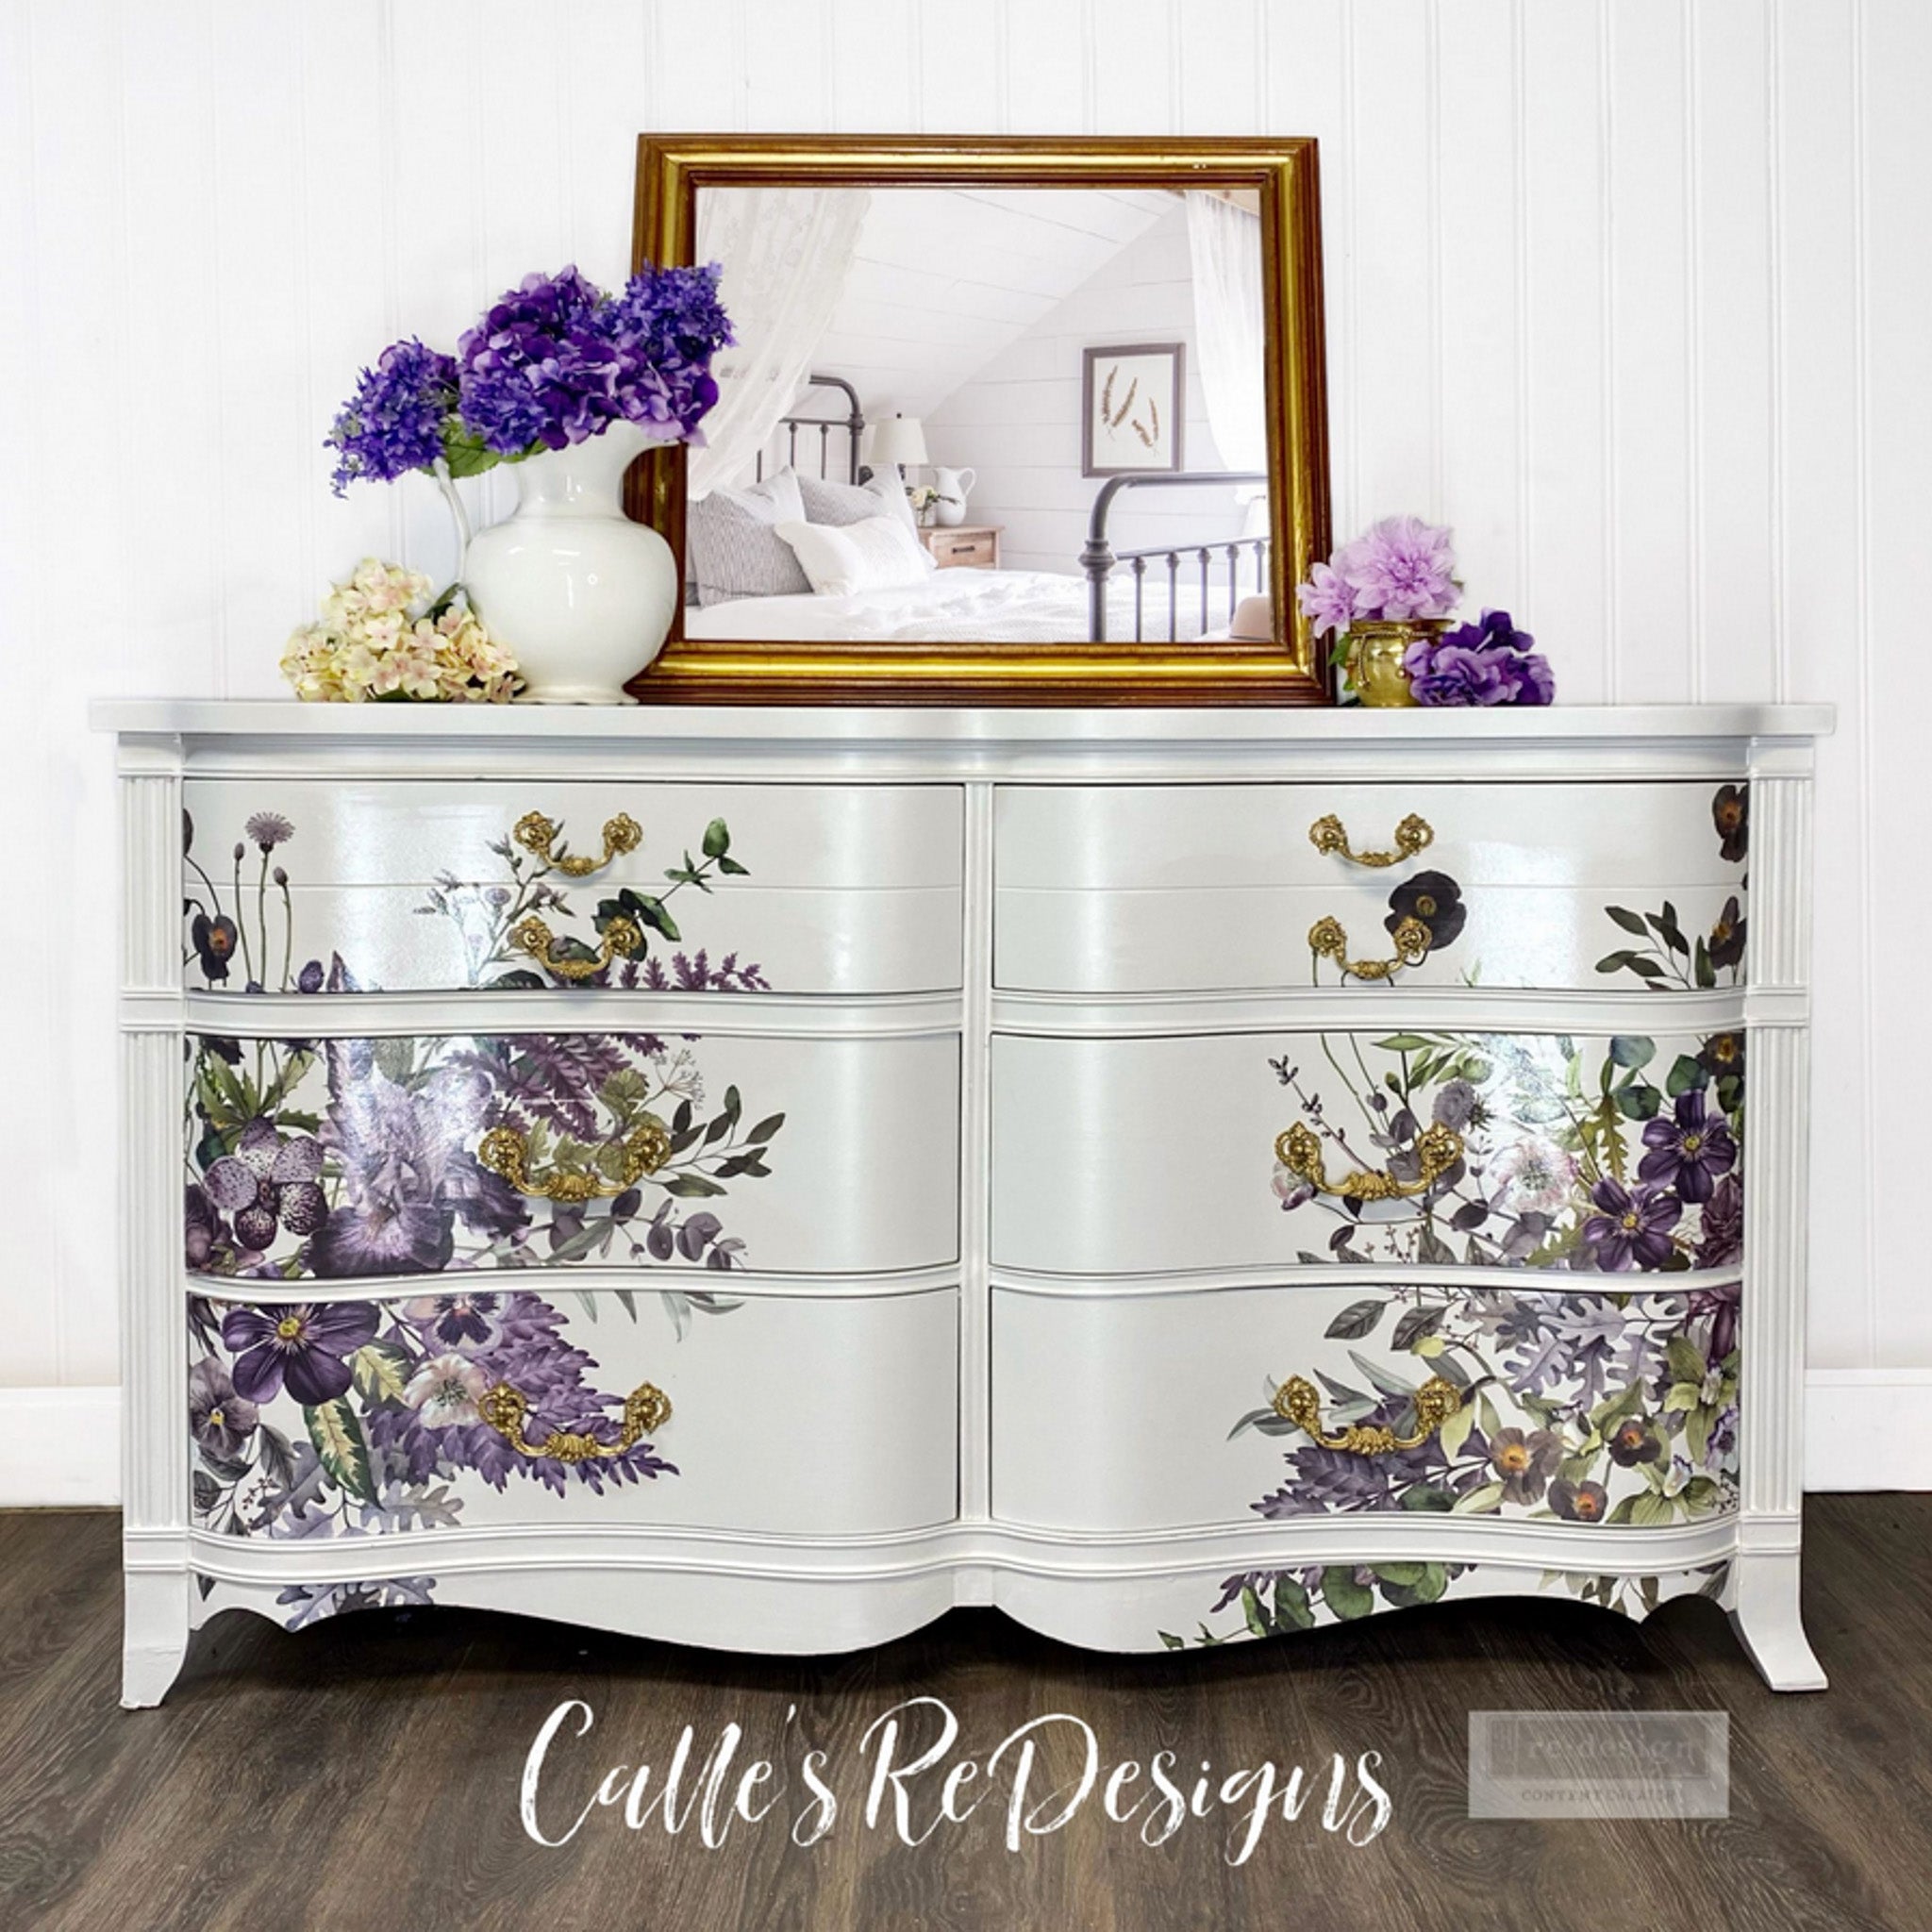 A vintage dresser refurbished by Calle's ReDesigns is painted white and features ReDesign with Prima's Vigrous Violet transfer on its drawers.